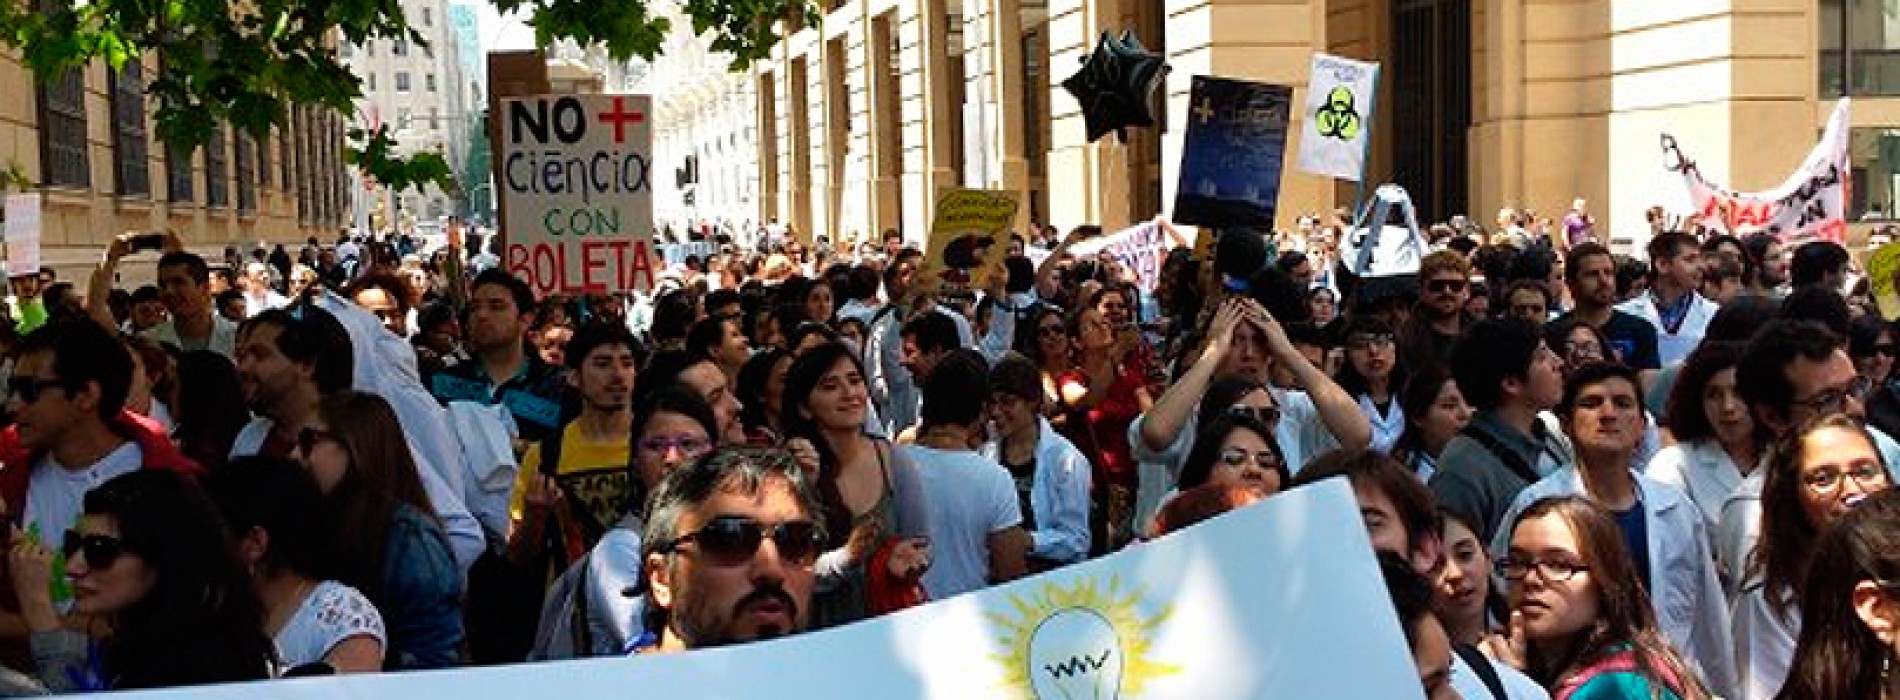 Science magazine - "Chilean scientists protest poor working conditions"